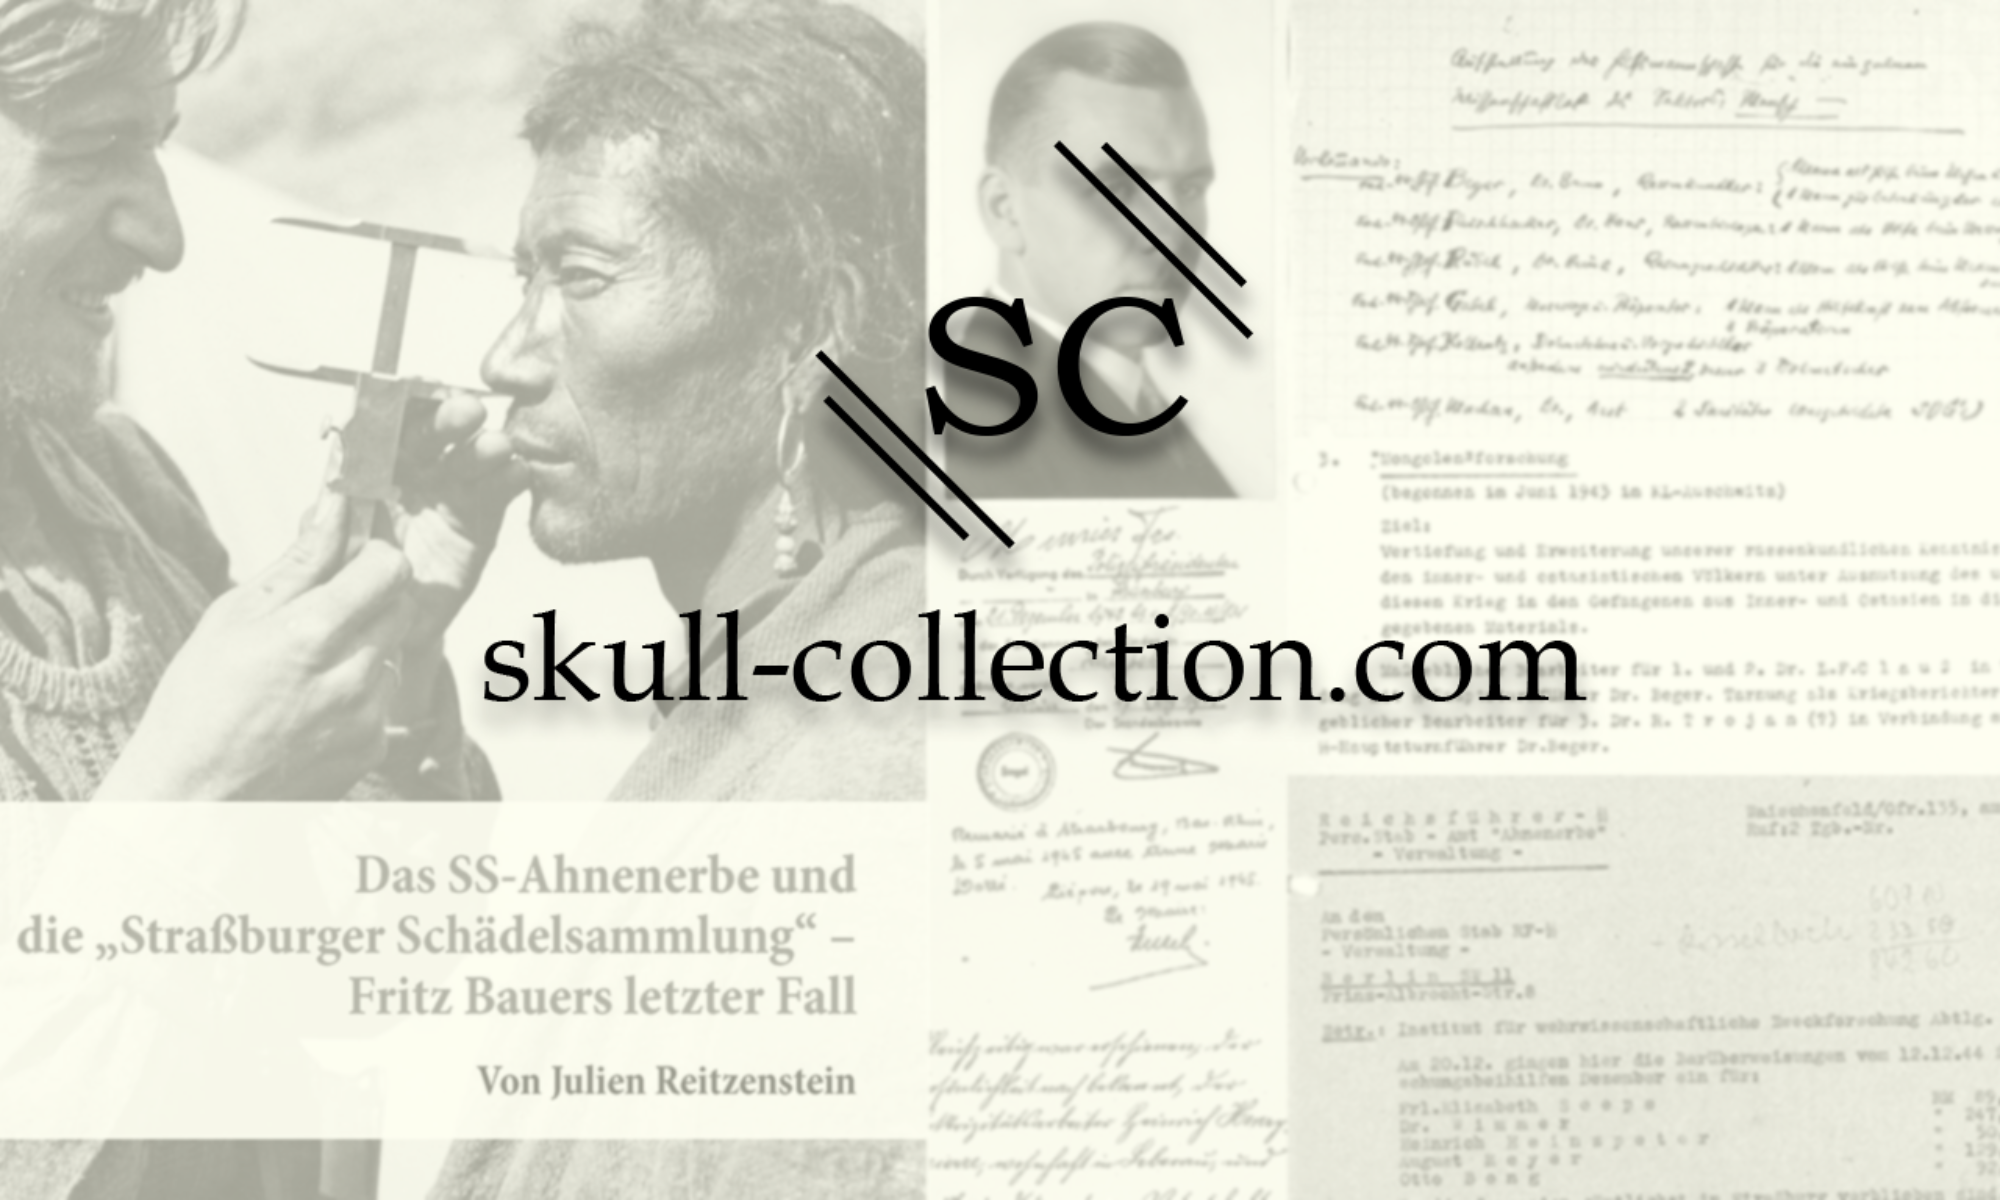 skull-collection.com